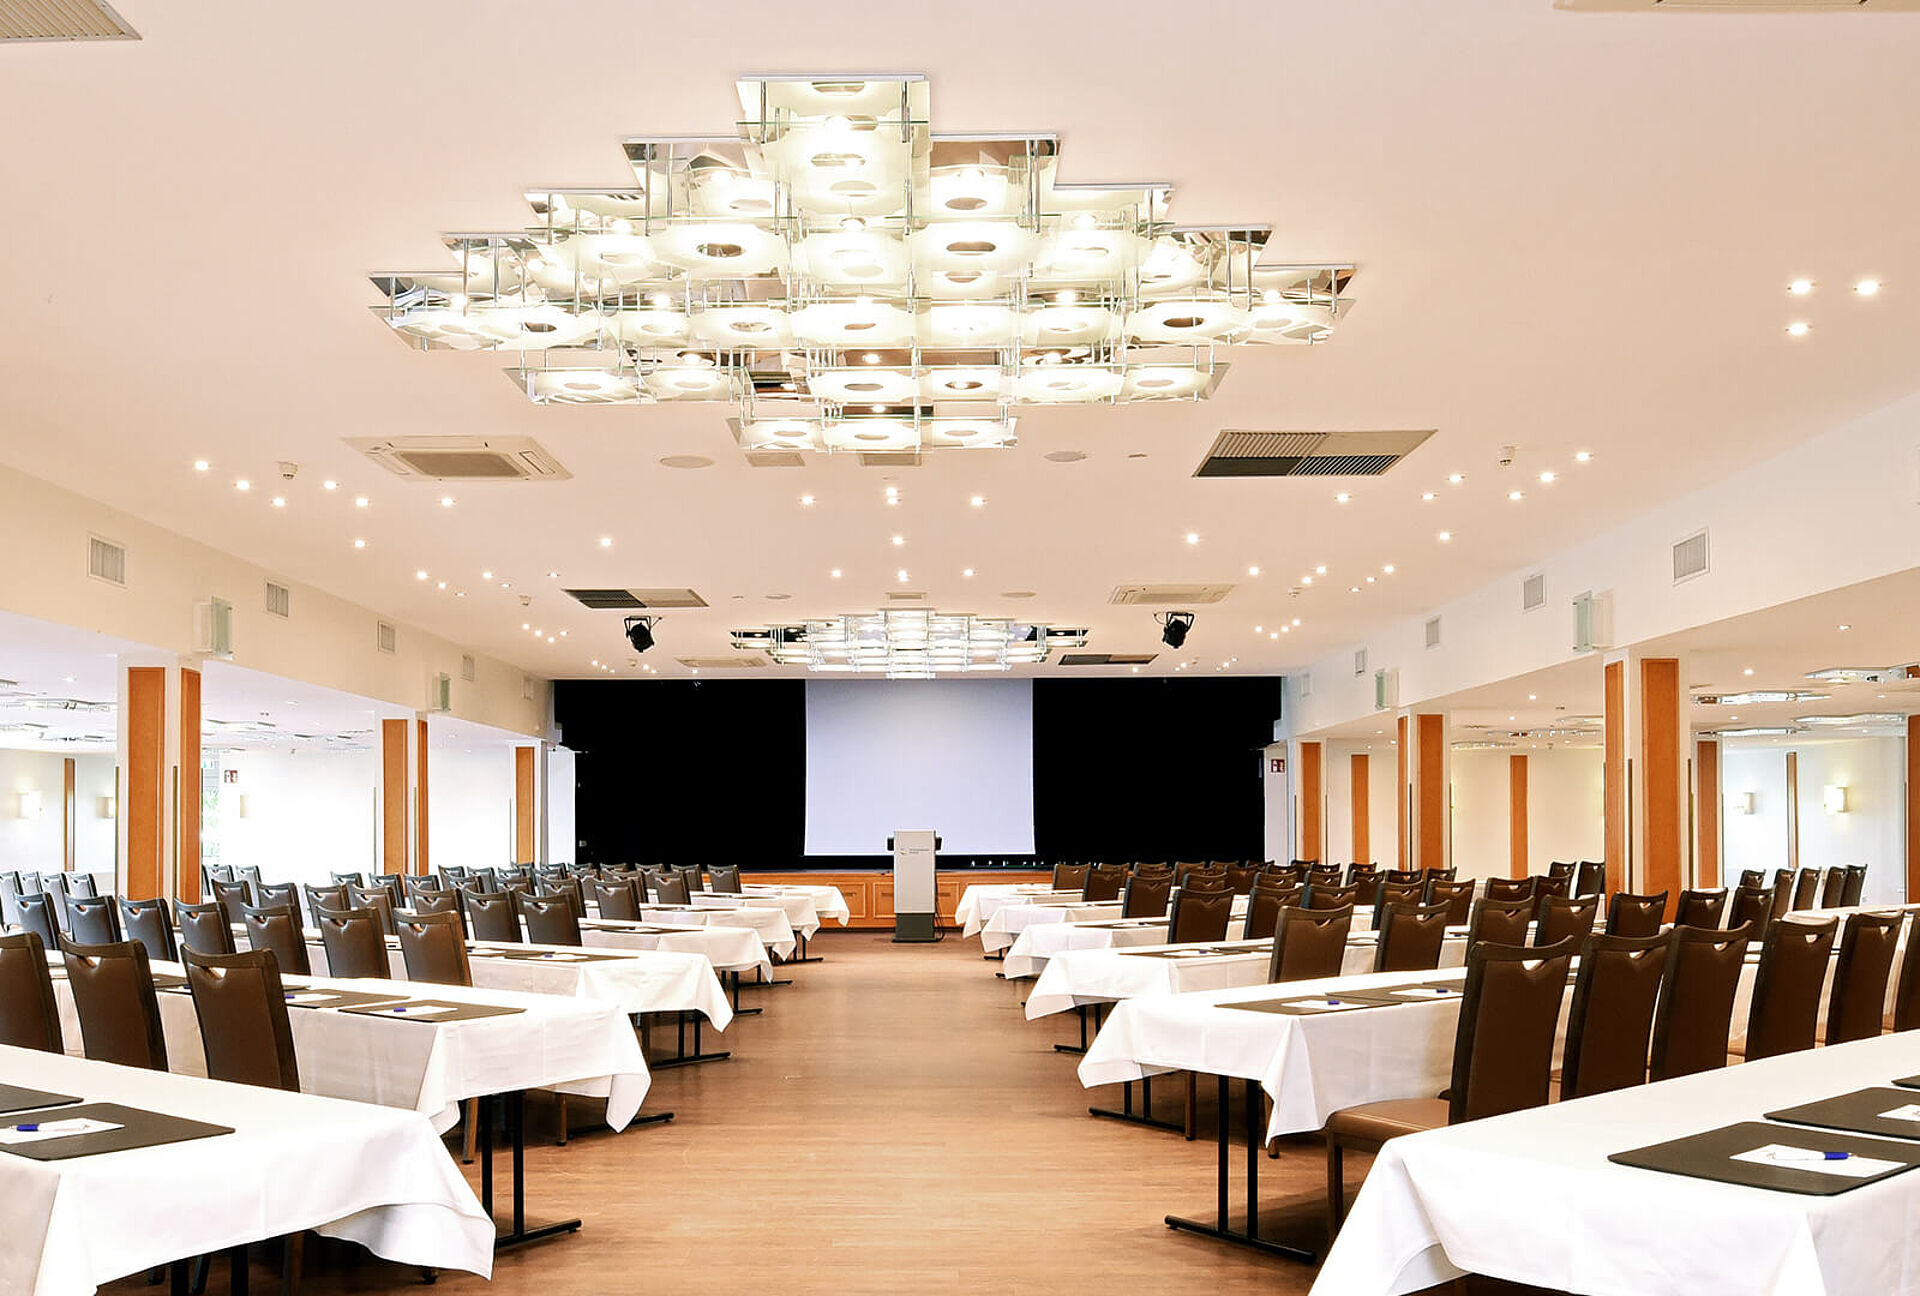 Conferences at the baltic sea